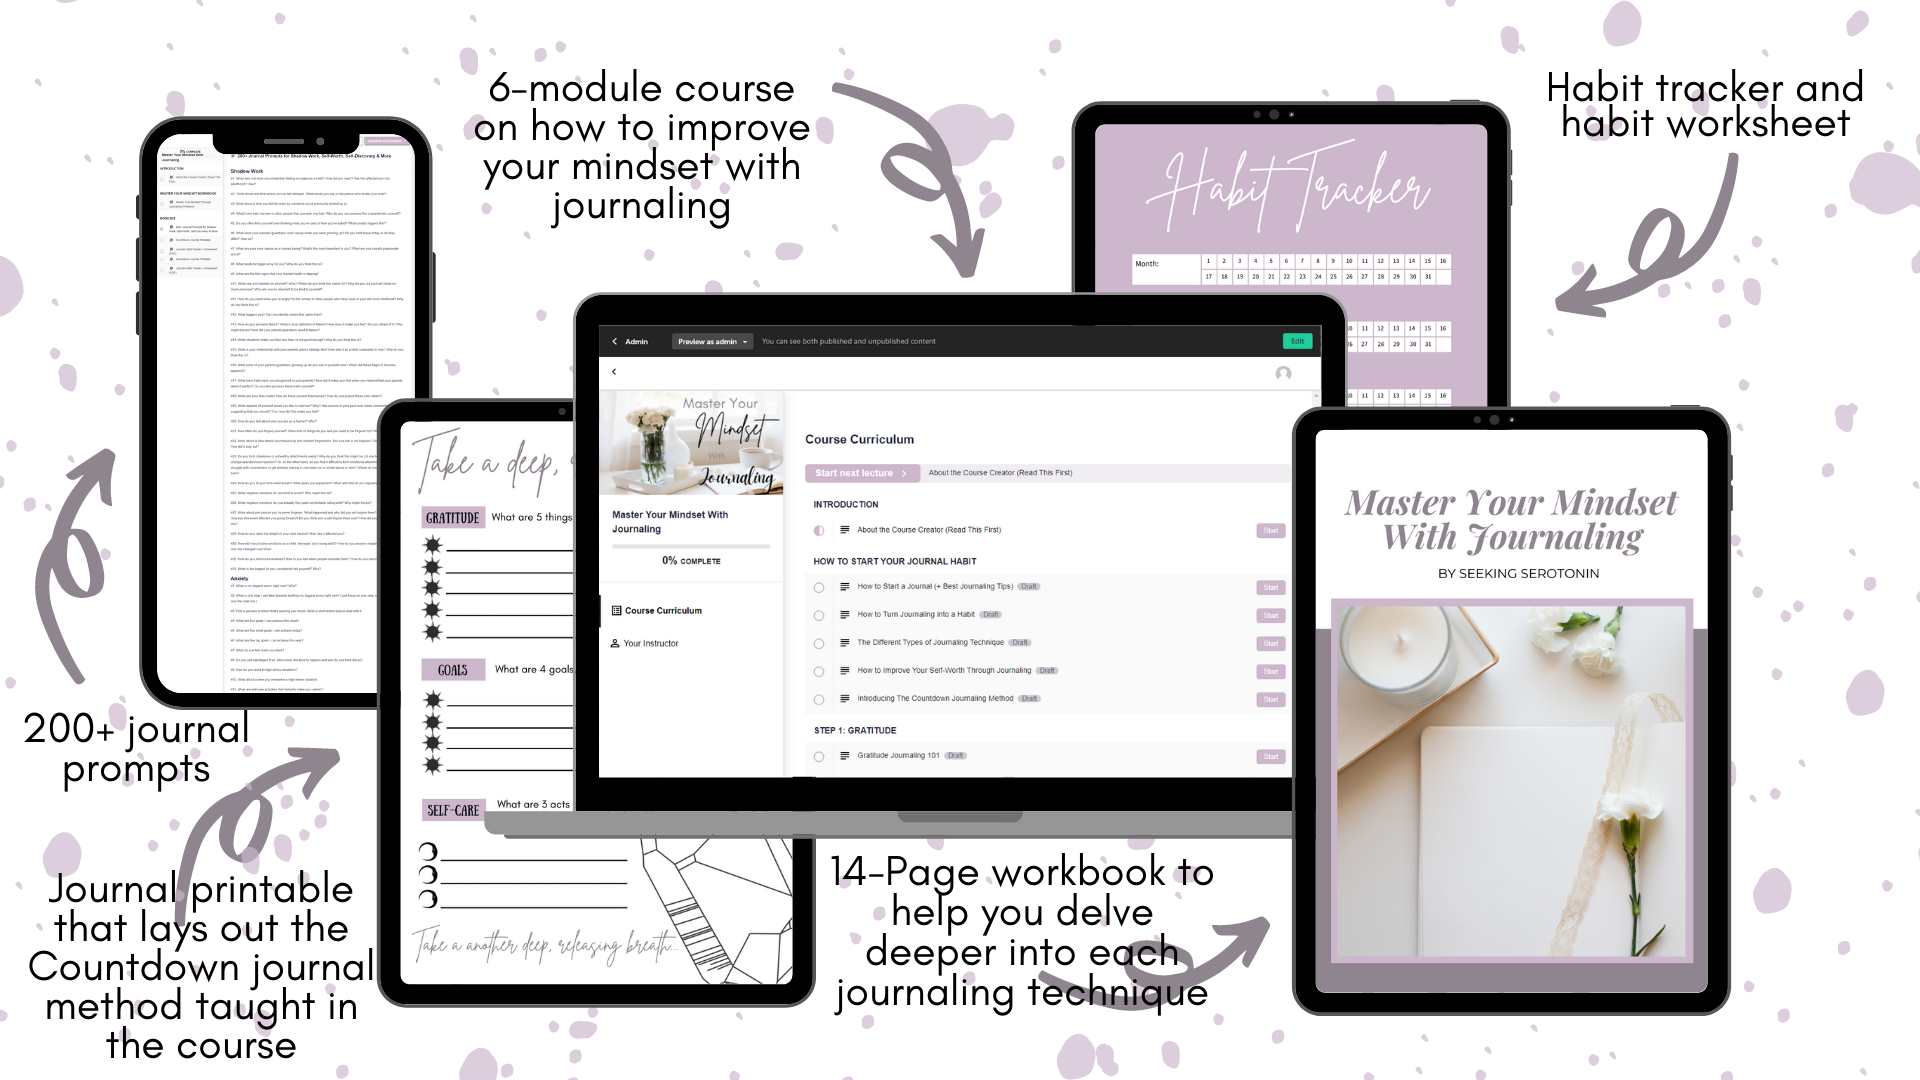 Everything included when you enrol in Master Your Mindset with Journaling